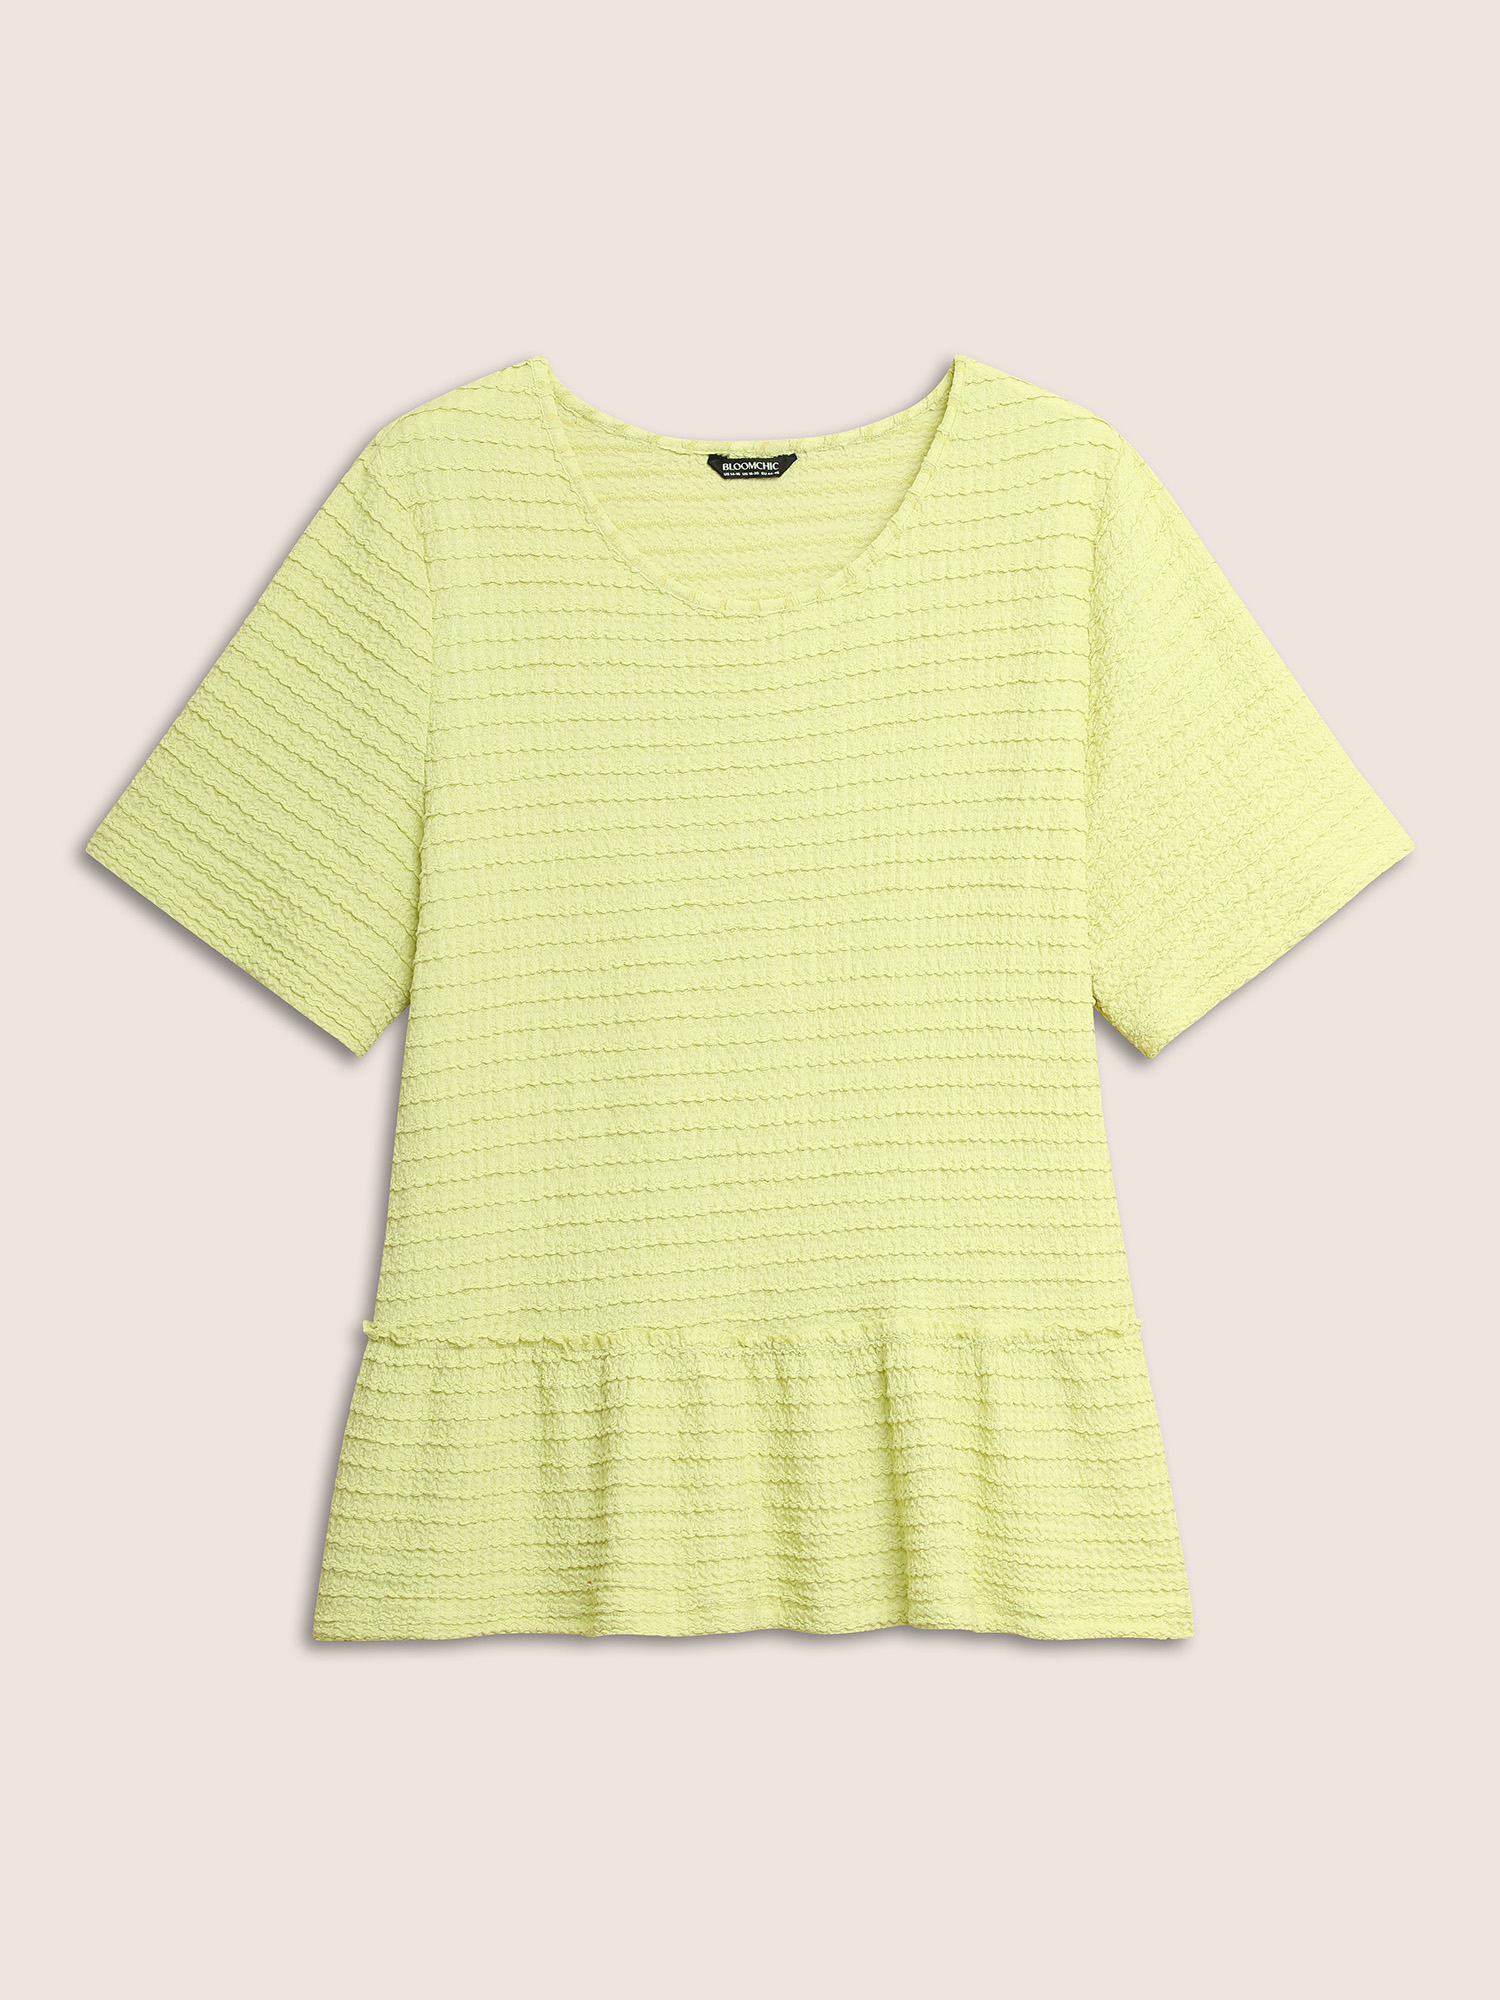 

Plus Size Solid Texture Patchwork Ruffle Hem T-shirt YellowGreen Women Casual Texture Round Neck Everyday T-shirts BloomChic